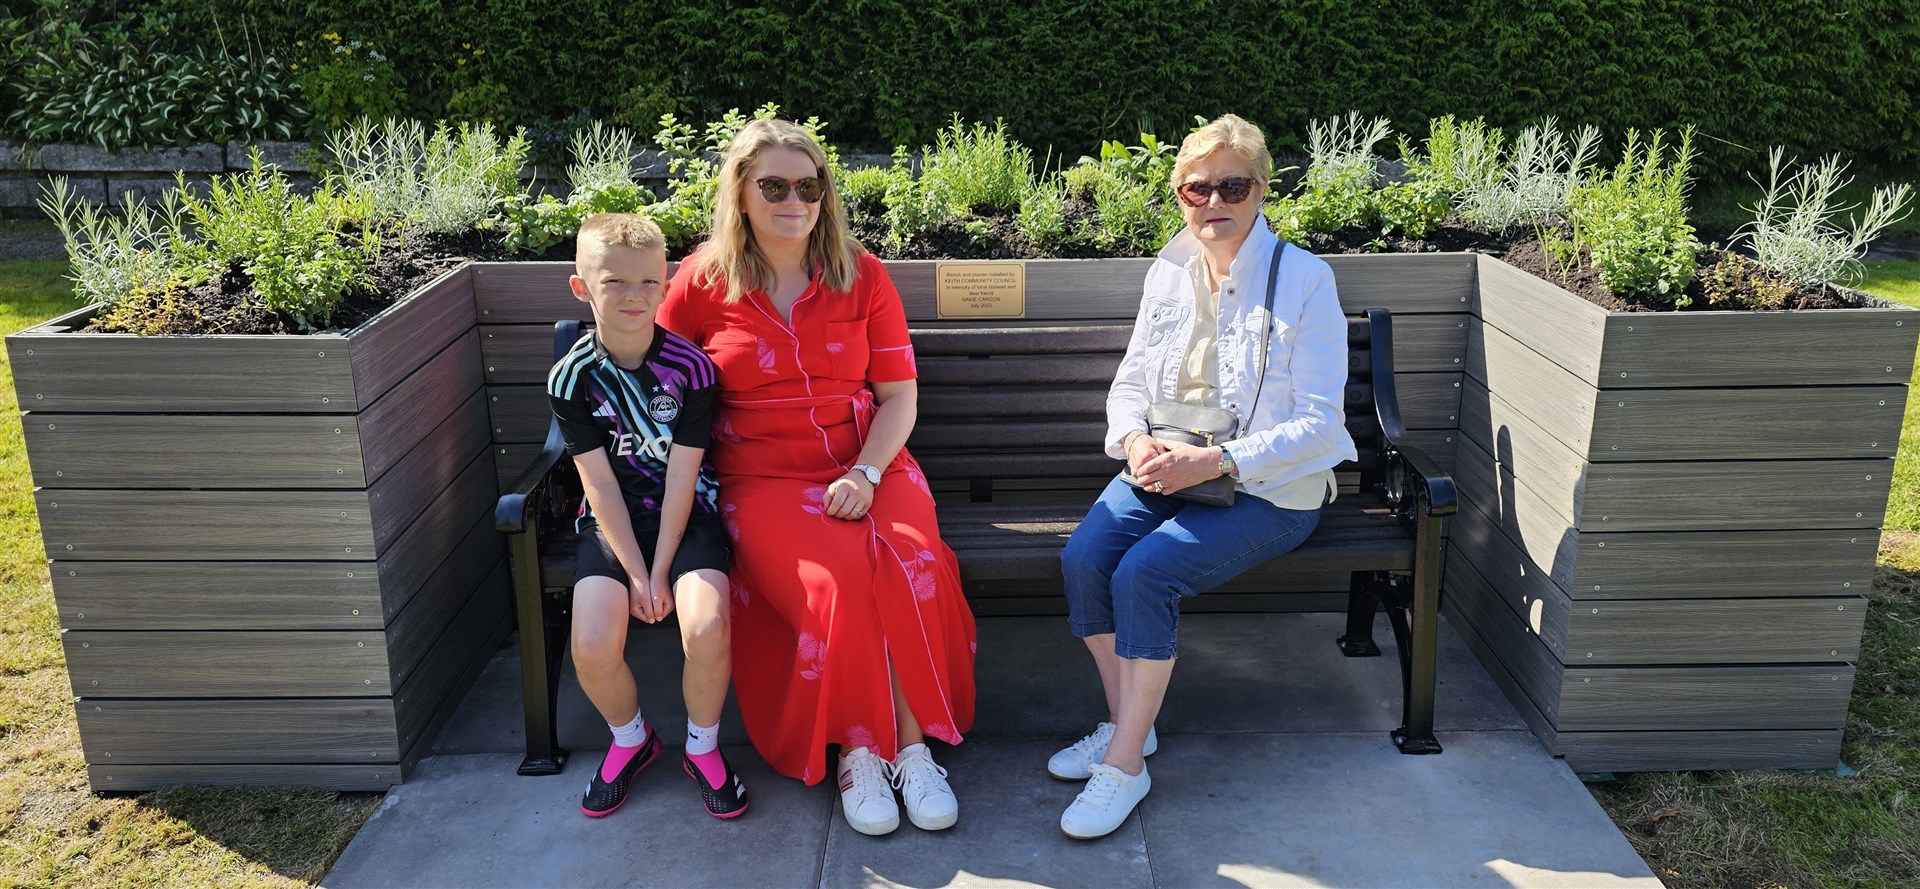 Harry, Denice and Helen sat on the bench.